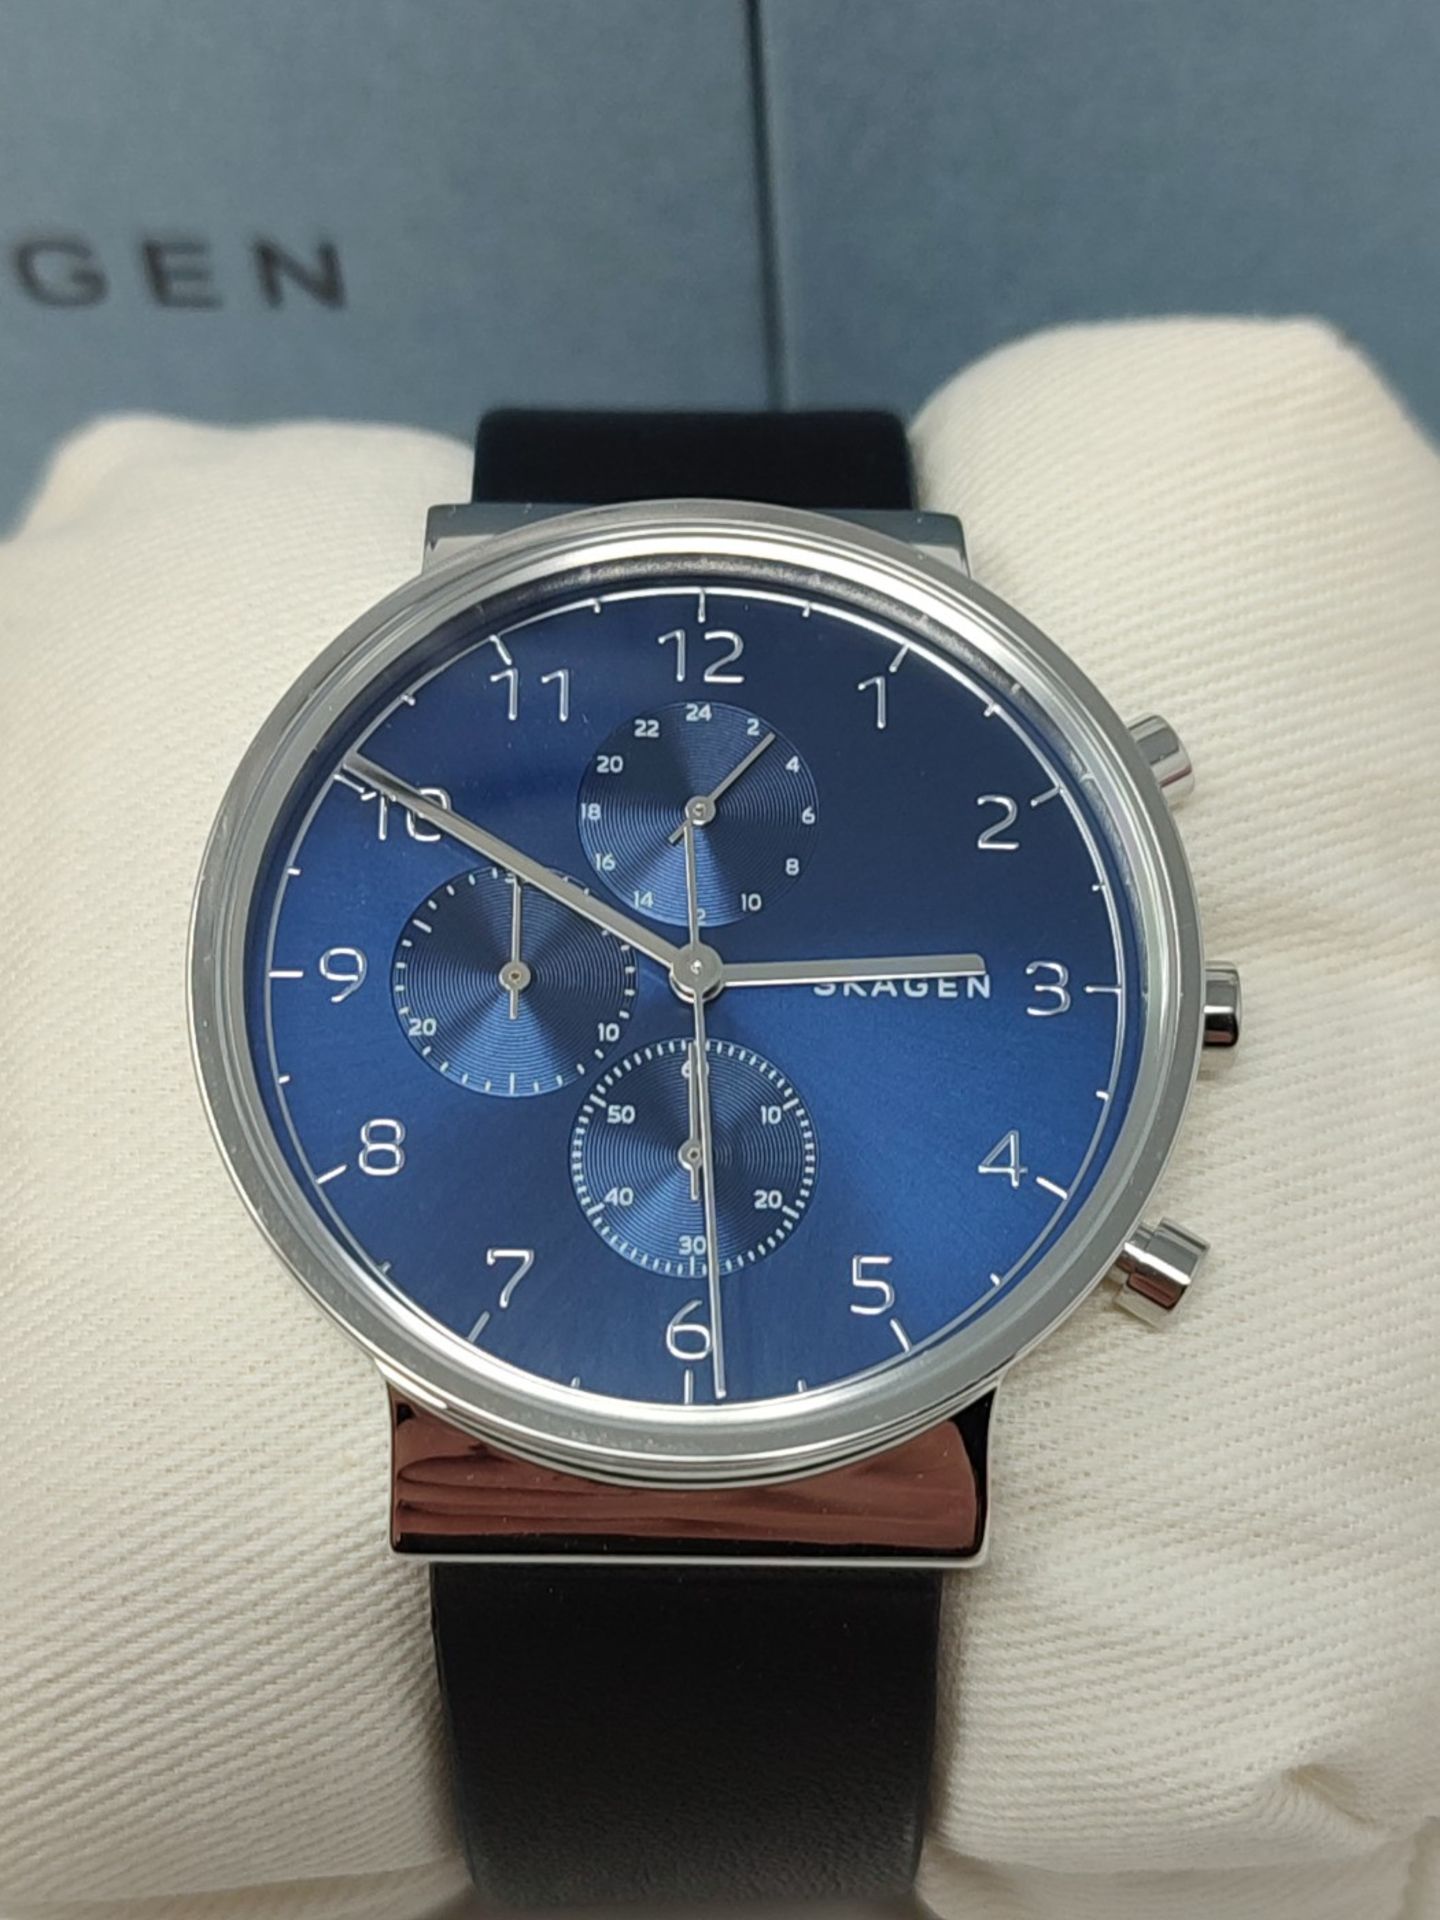 RRP £149.00 Skagen Mens Chronograph Quartz Watch with Leather Strap - Image 3 of 3